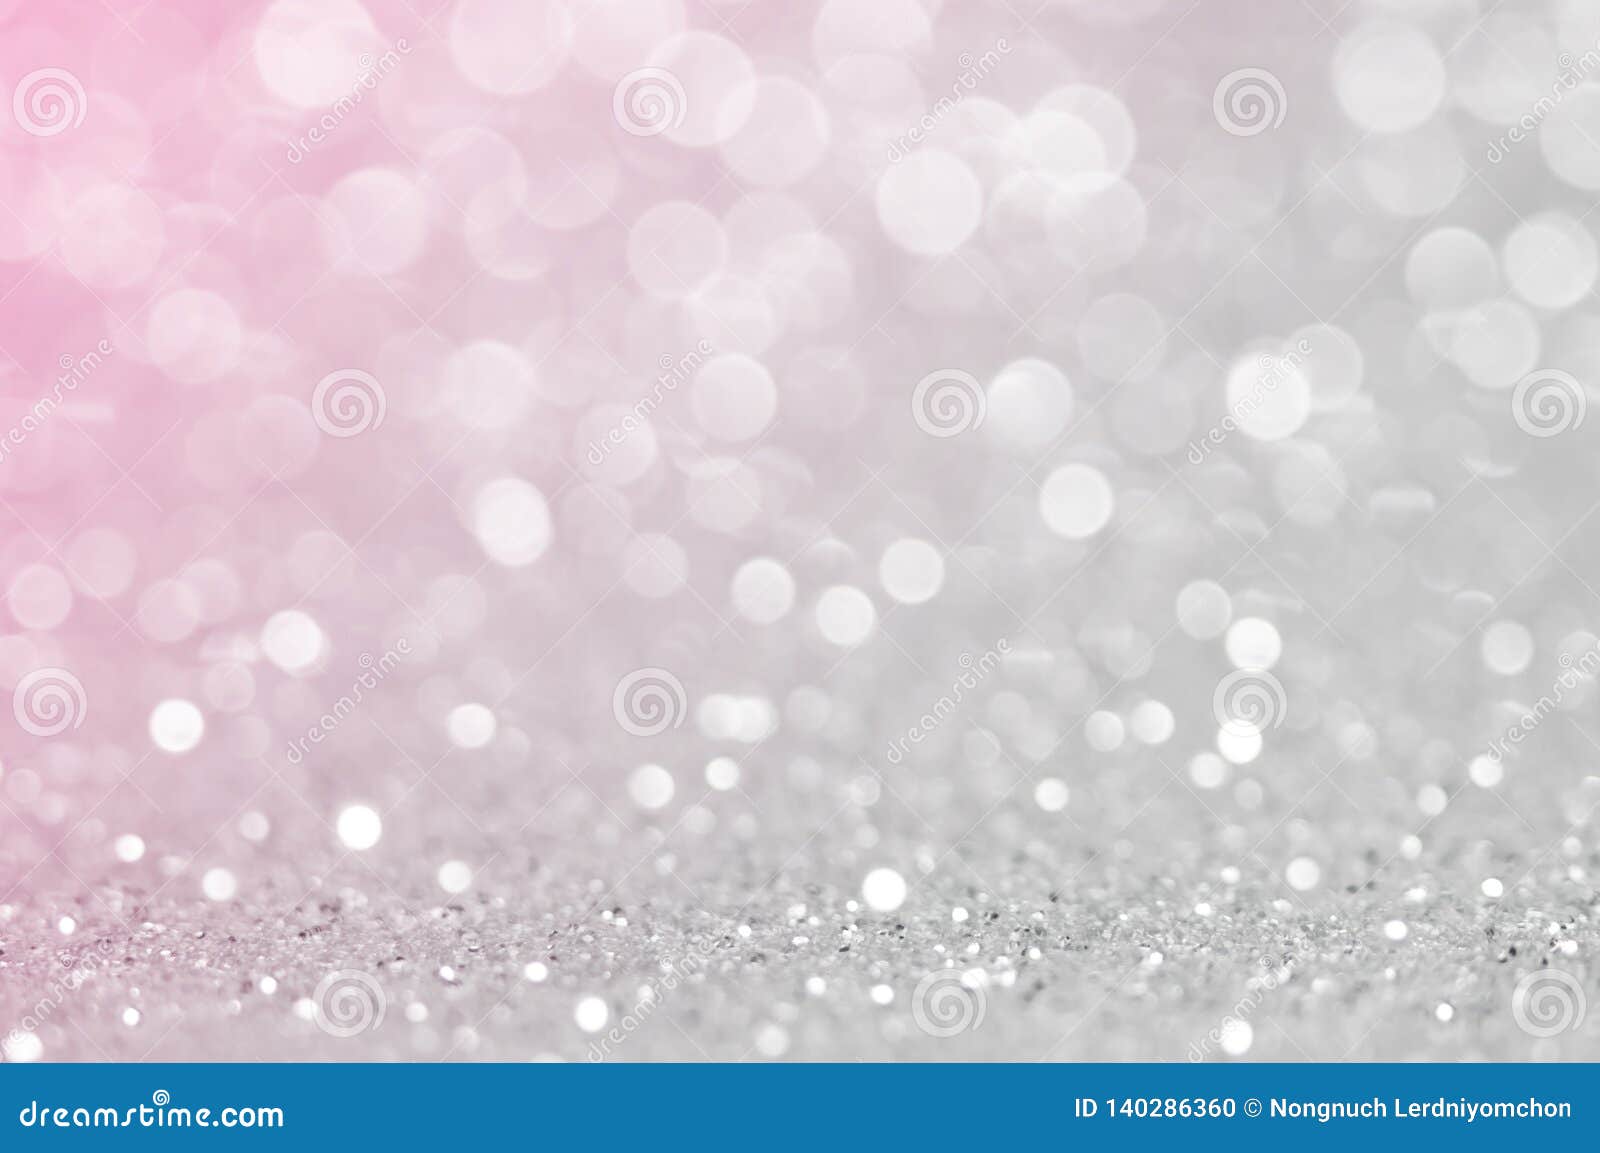 https://thumbs.dreamstime.com/z/abstract-light-grey-sliver-pink-color-de-focused-circular-background-night-light-season-greeting-background-luxury-backdrop-140286360.jpg